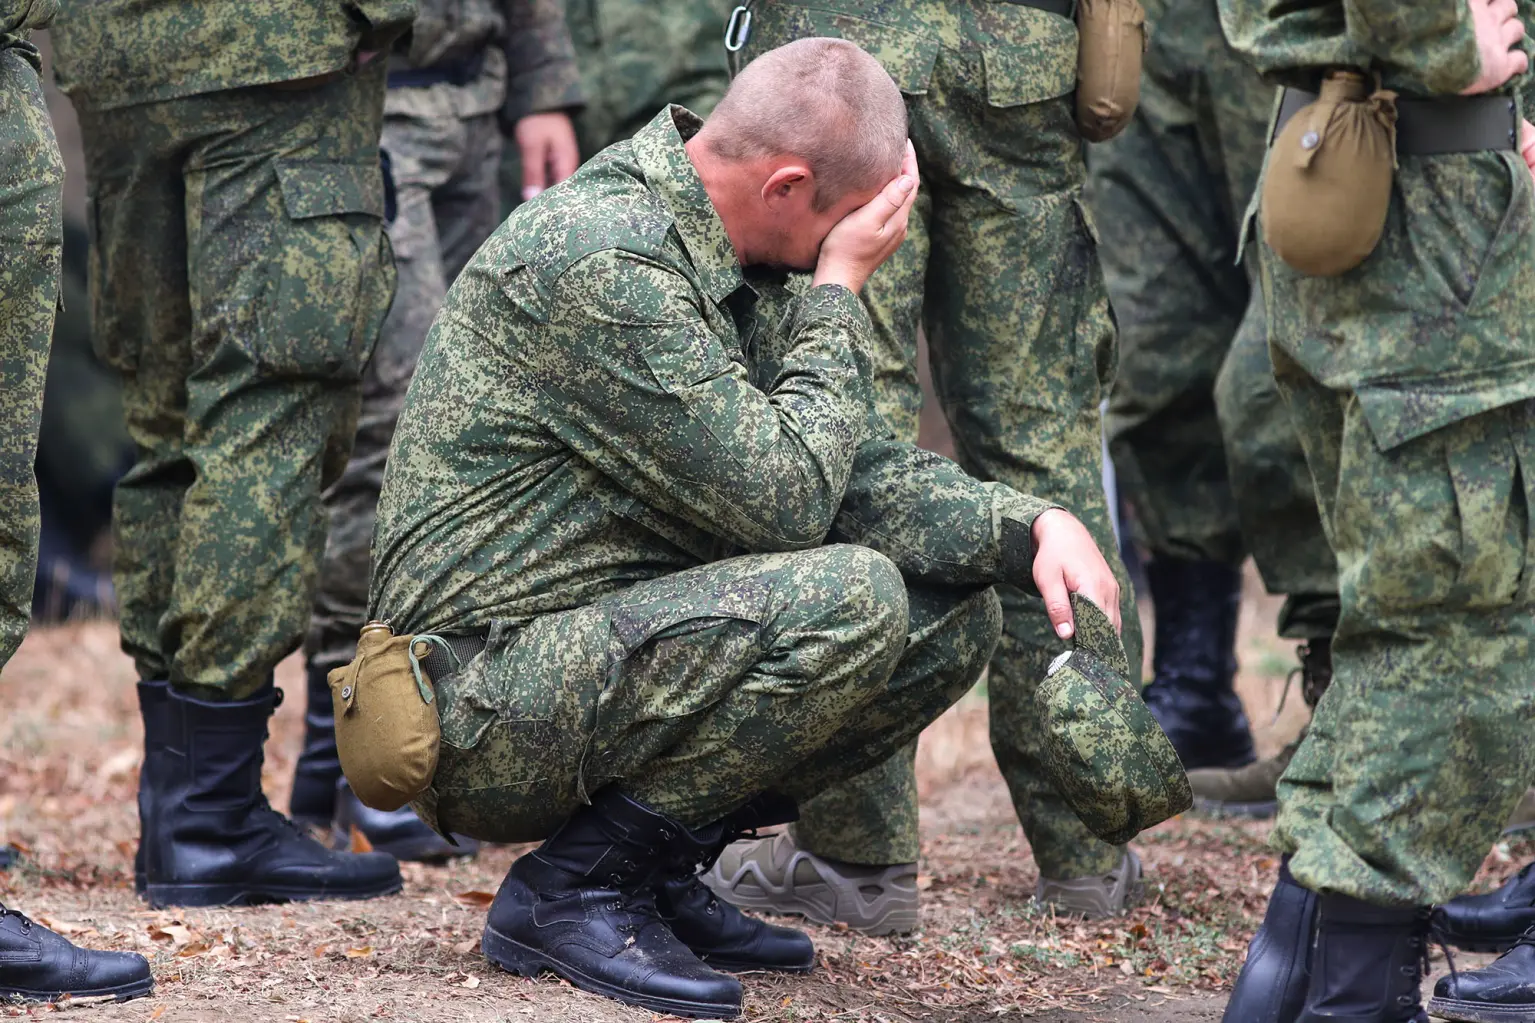 Thousands of russia’s Military Want to Be Alive and Ready to Surrender, Defense Express